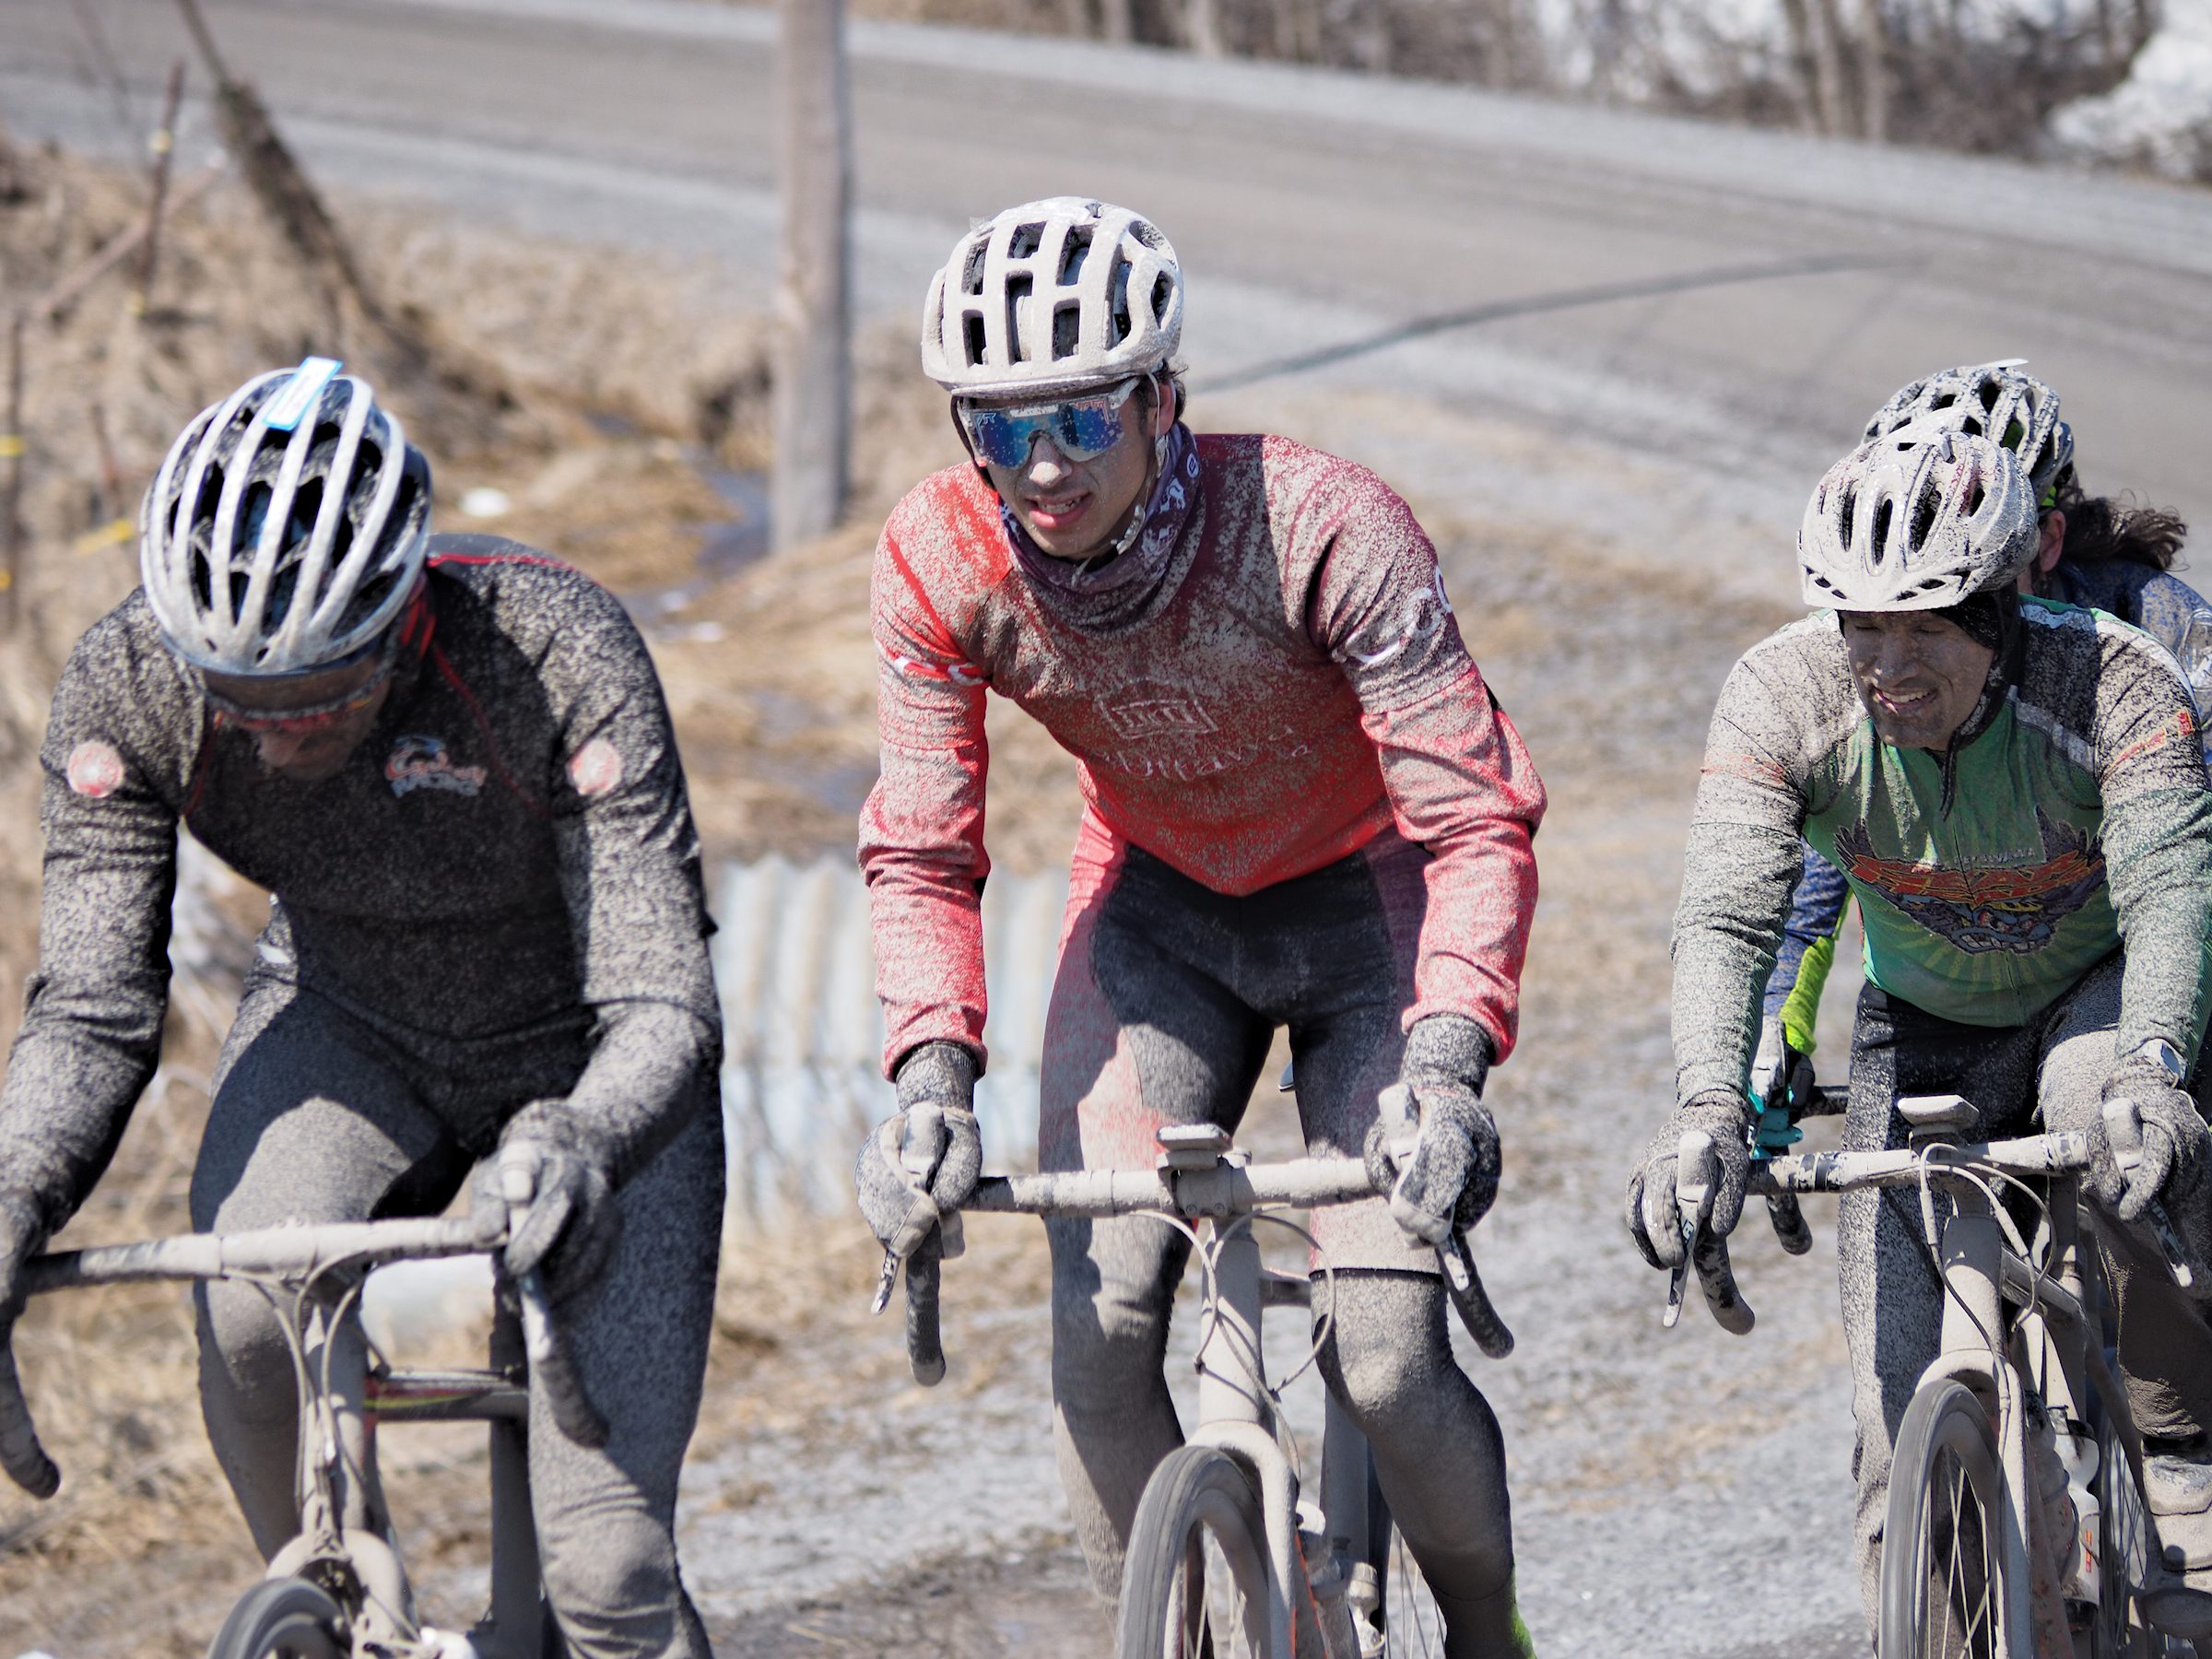 Ontario gravel events your can ride in 2019 - Canadian Cycling